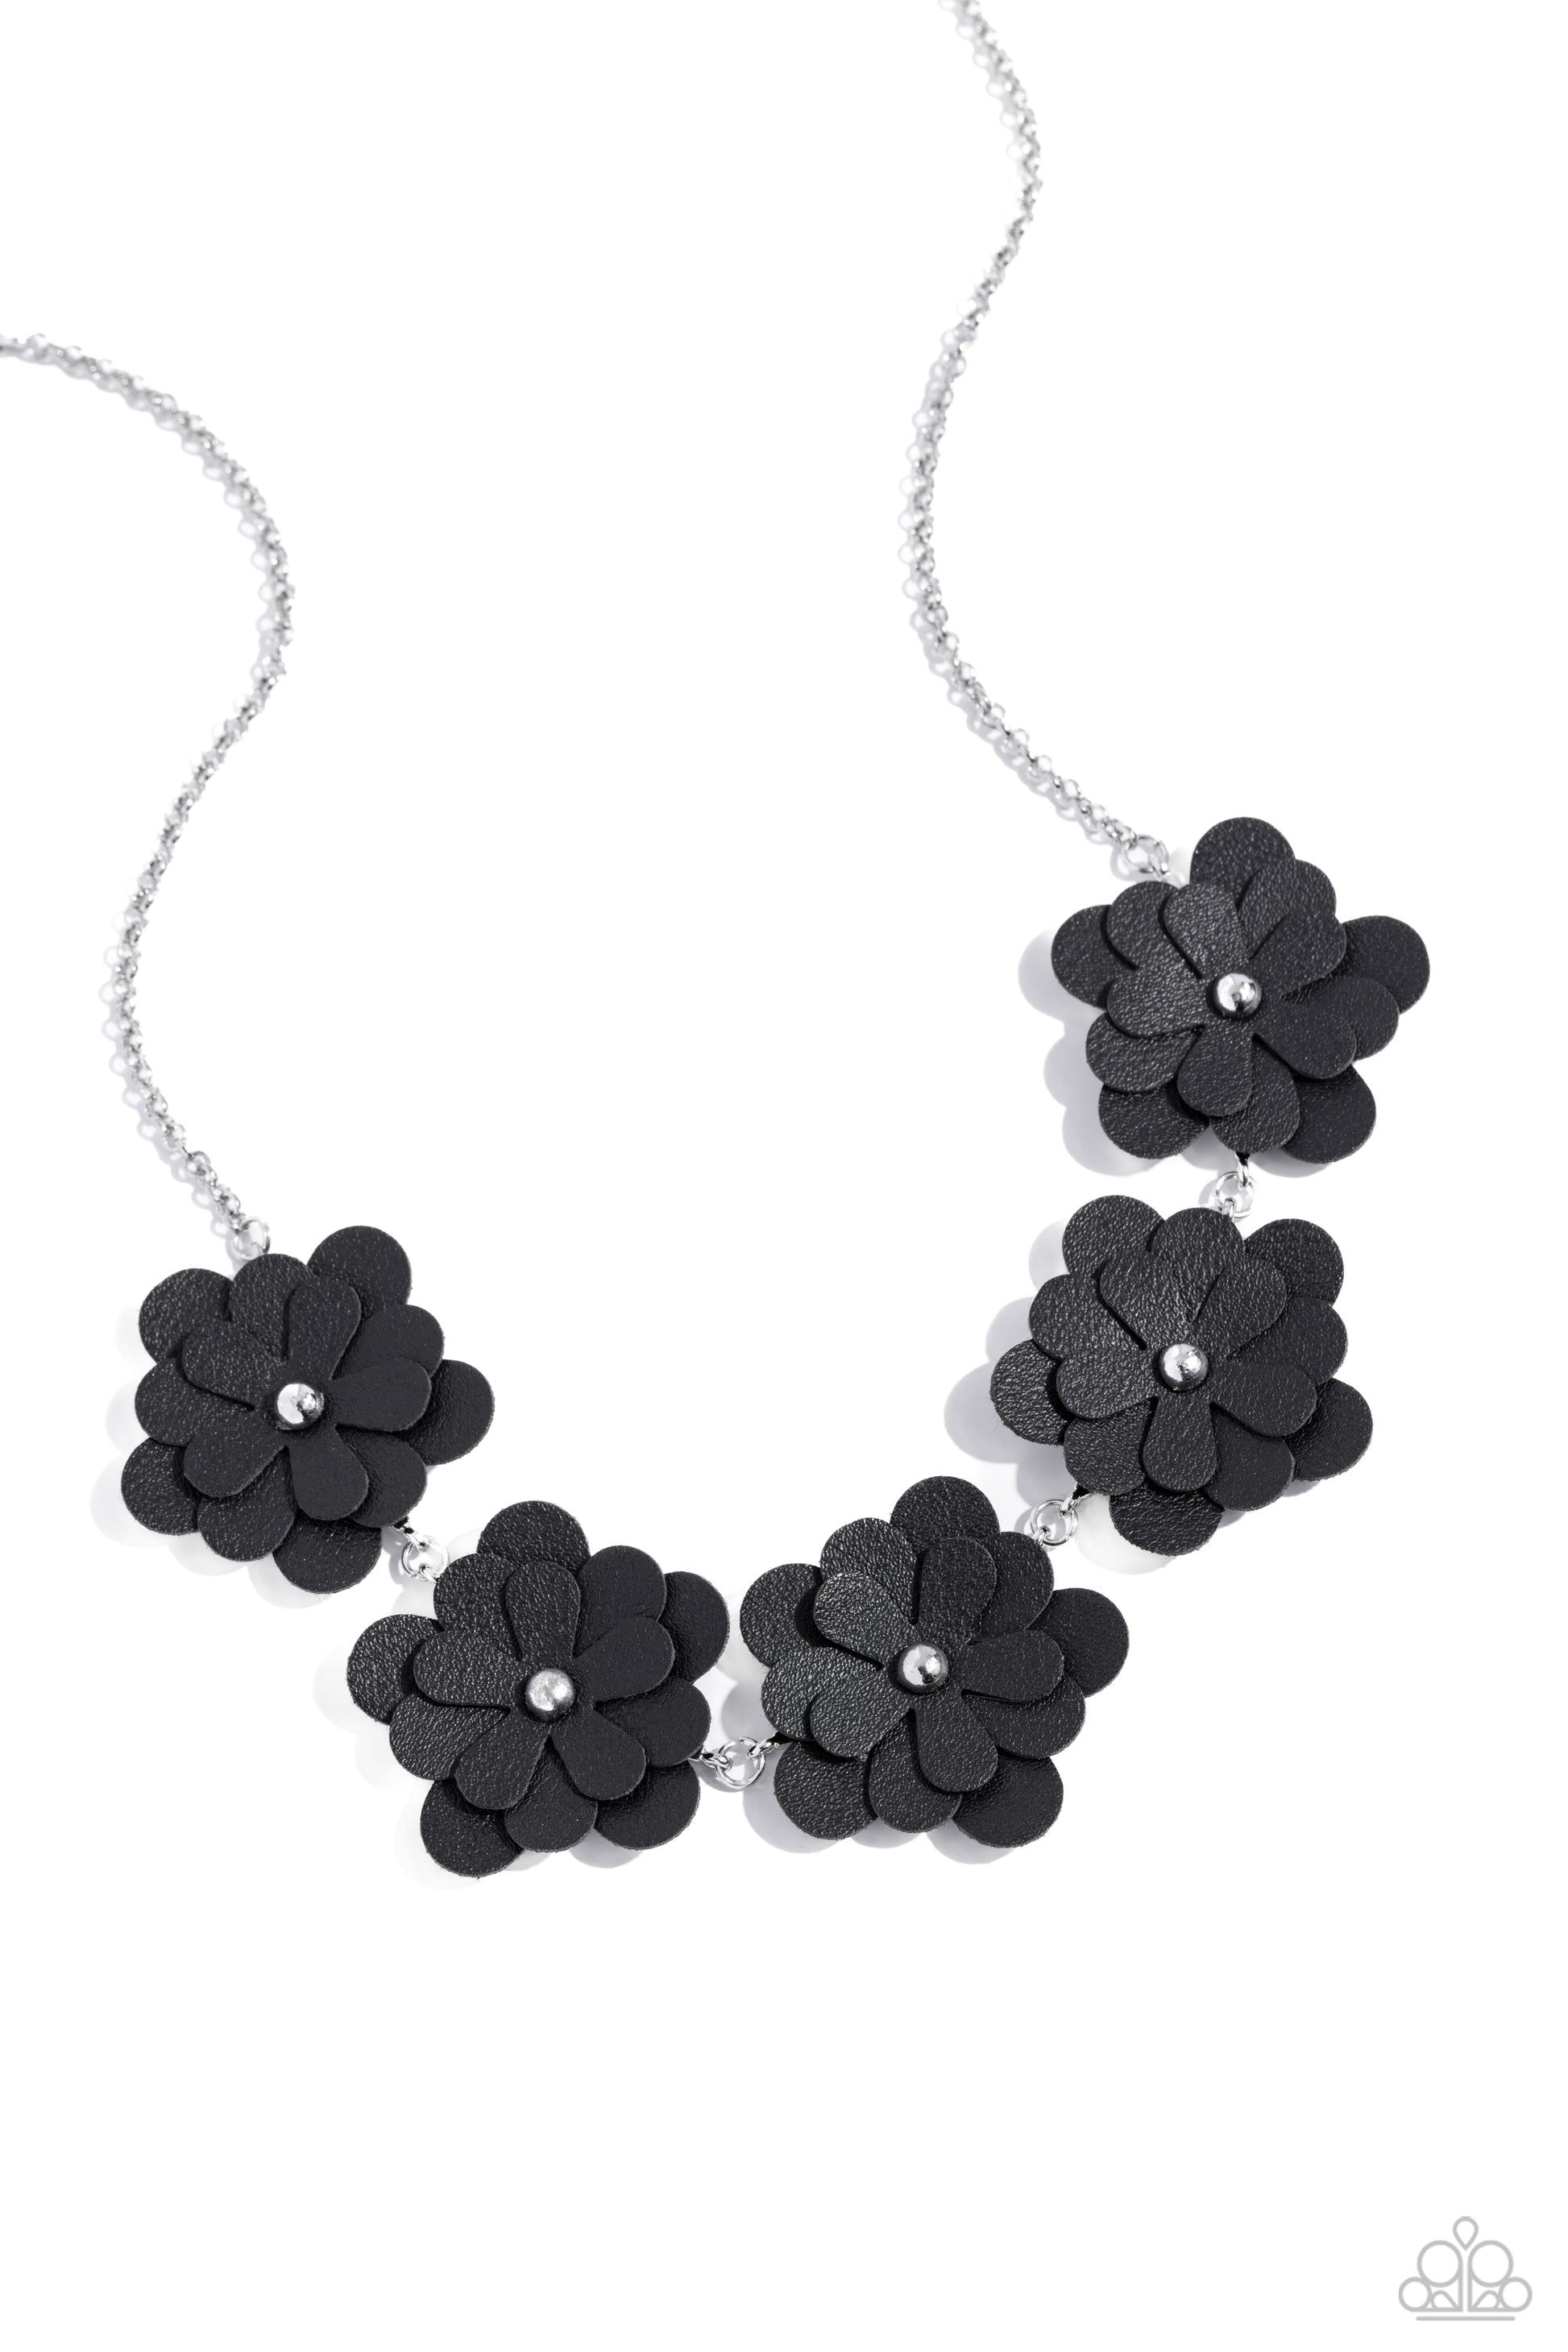 Balance of FLOWER Black Necklace - Paparazzi Accessories   Featuring silver stud centers, a collection of 3D black leather flowers connect to a classic silver chain for a ruggedly retro look. Features an adjustable clasp closure. Sold as one individual necklace. Includes one pair of matching earrings.  SKU: P2WH-BKXX-324XX